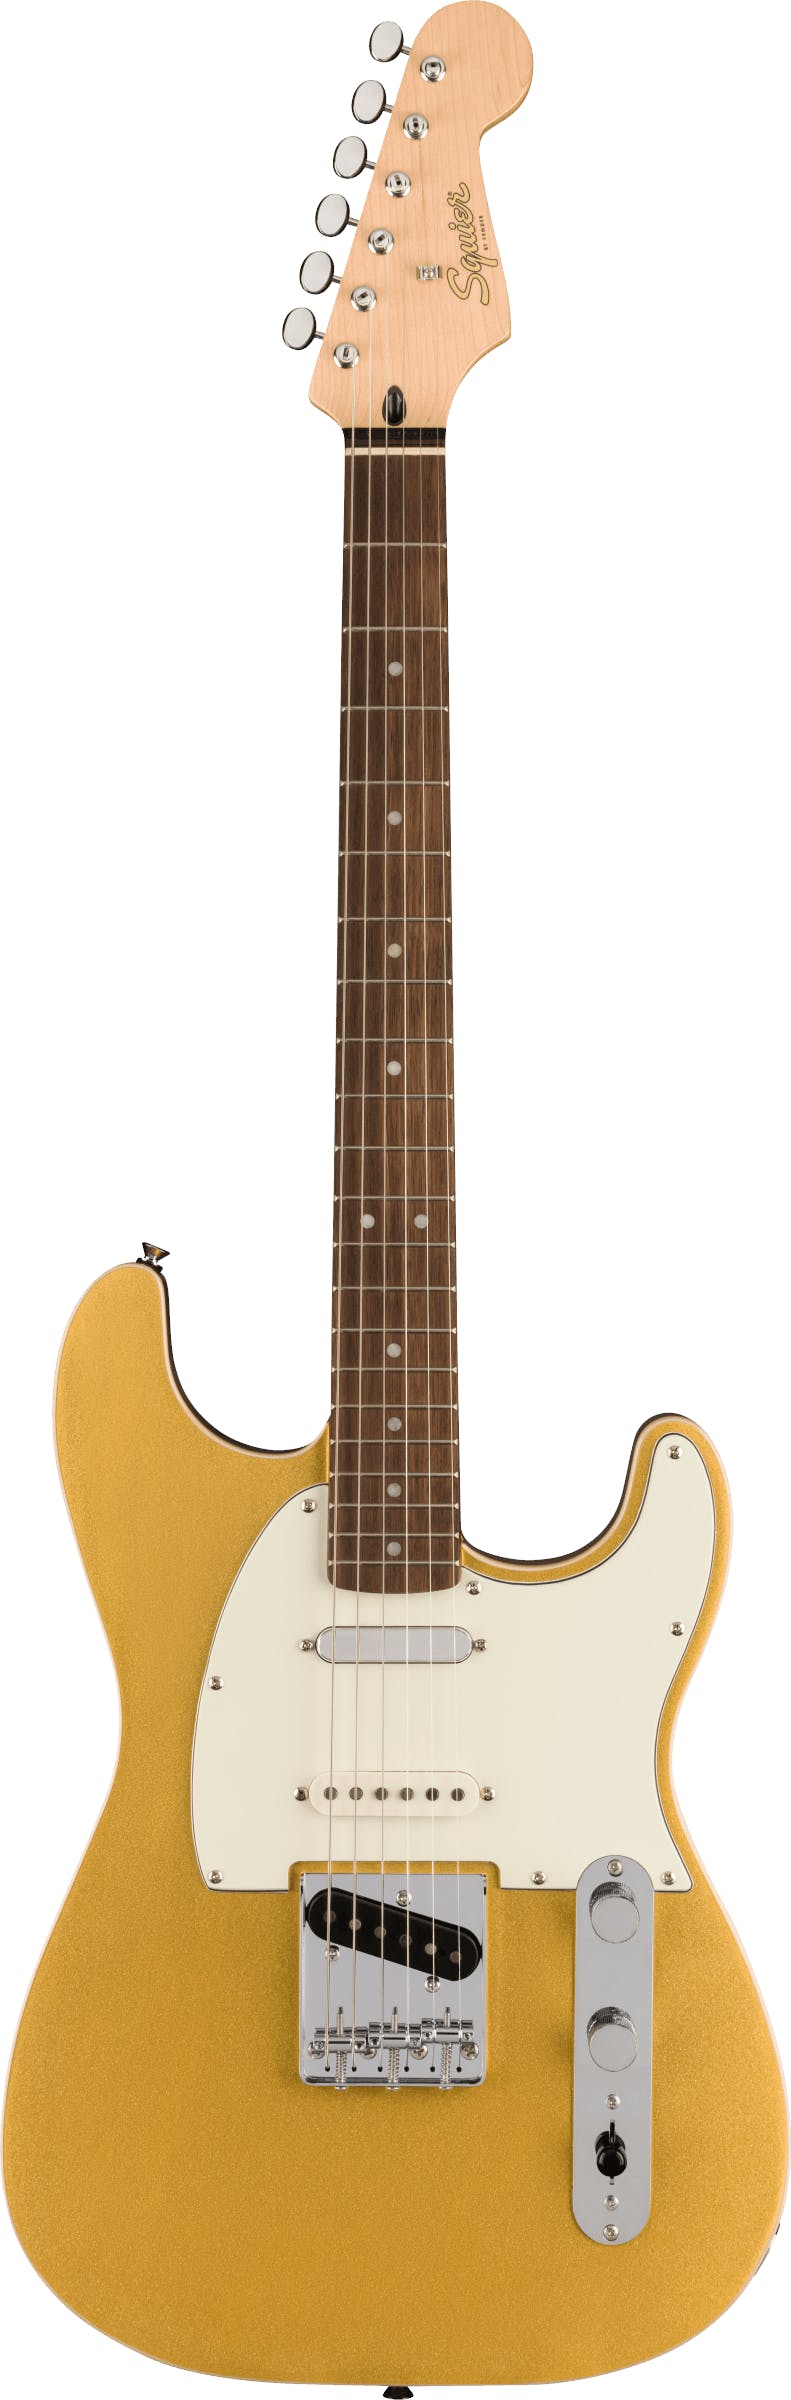 Squier paranormales 0377040578-Squier-Paranormal-Custom-Nashville-Stratocaster-Aztec-Gold.png